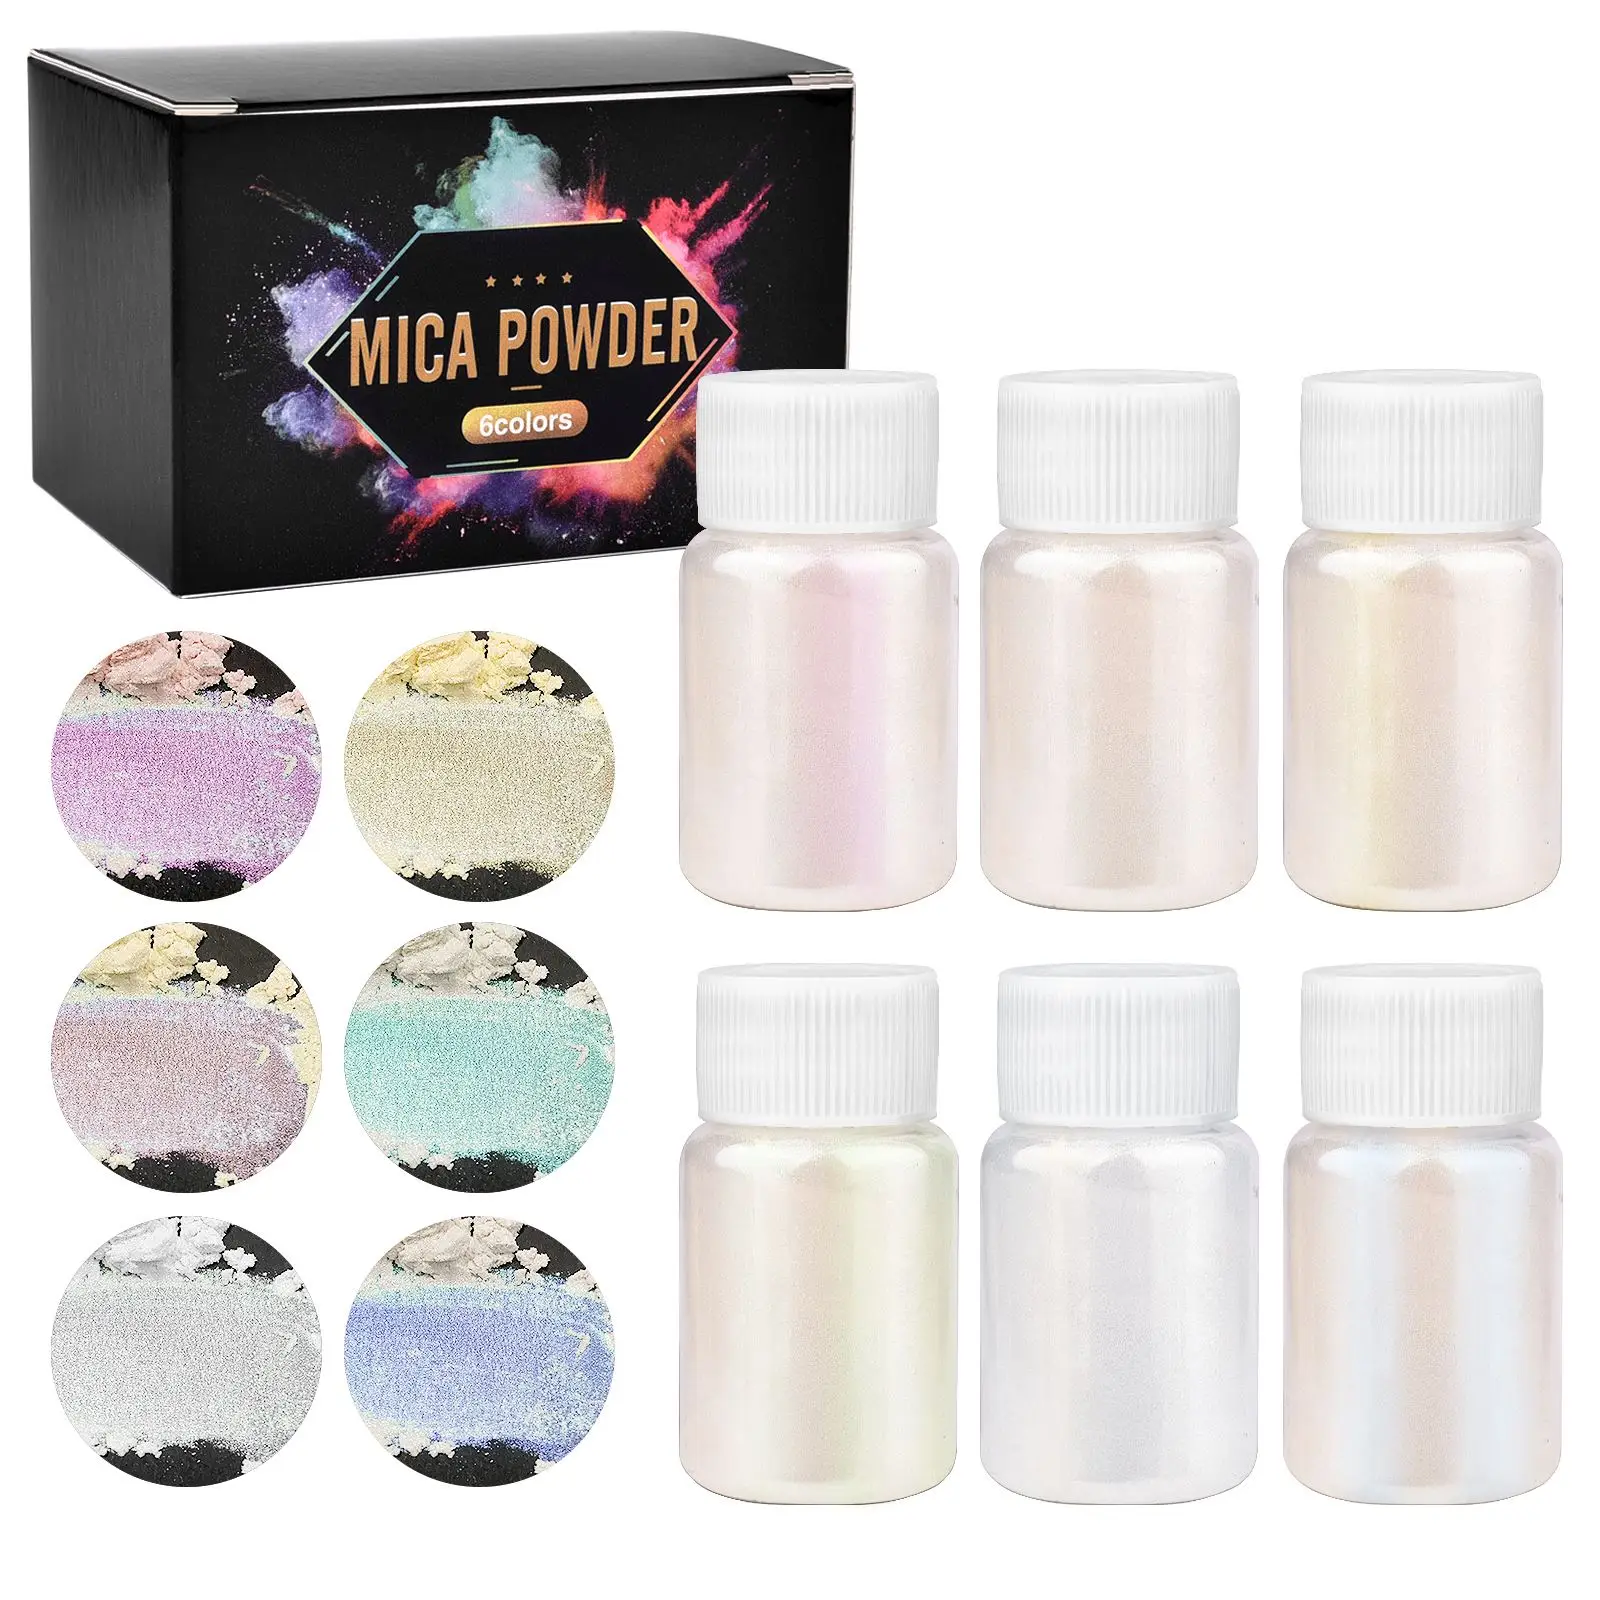 6Colors/Box Mica Powder Powdered Pigments Kit Colorant Dye DIY Resin Mold Jewelry Making Accessories Epoxy Color Pigment